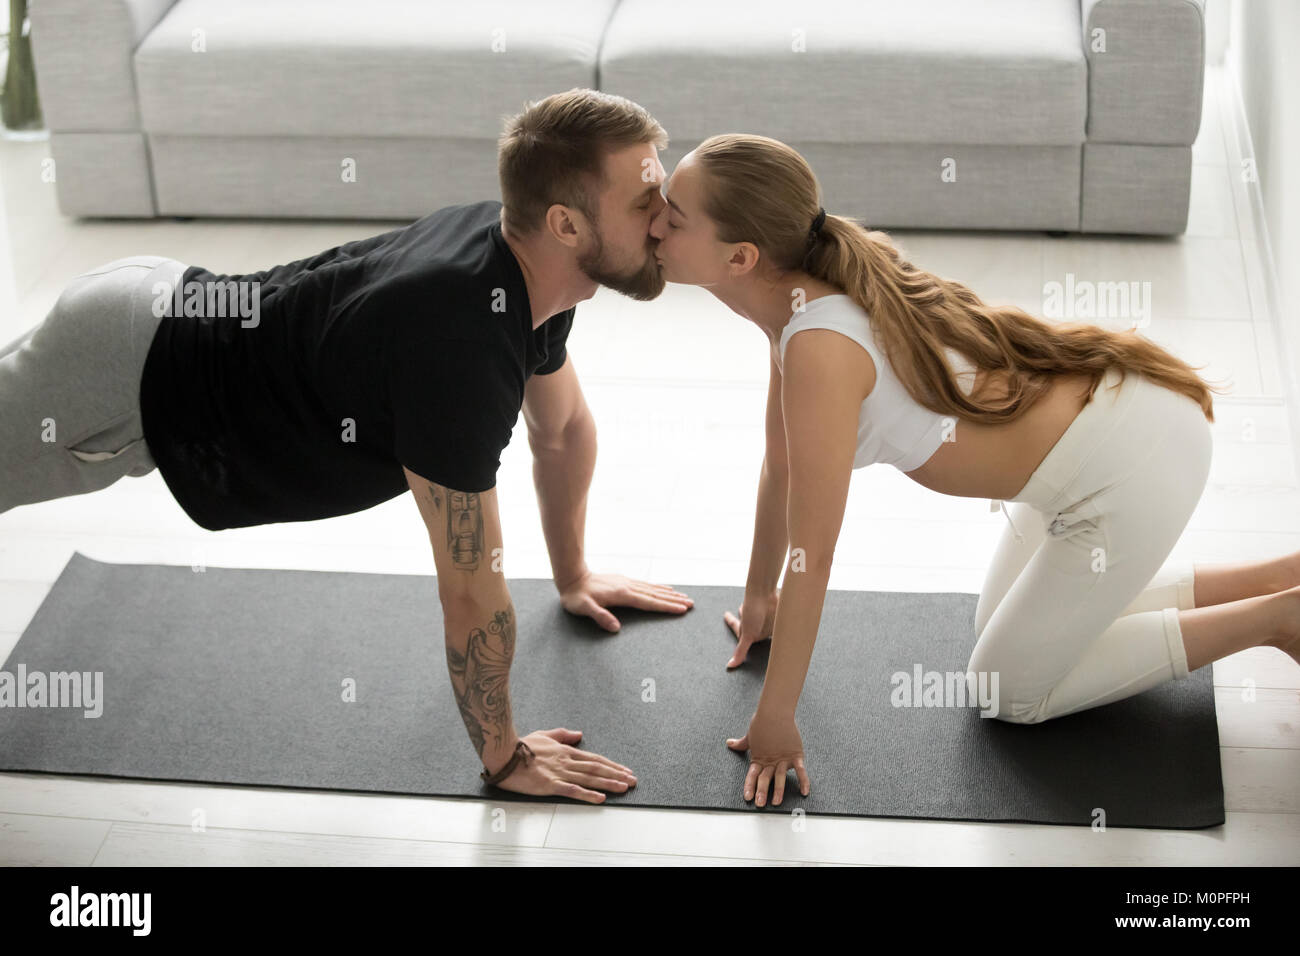 Sporty fit man performing plank exercise at home kissing woman Stock Photo